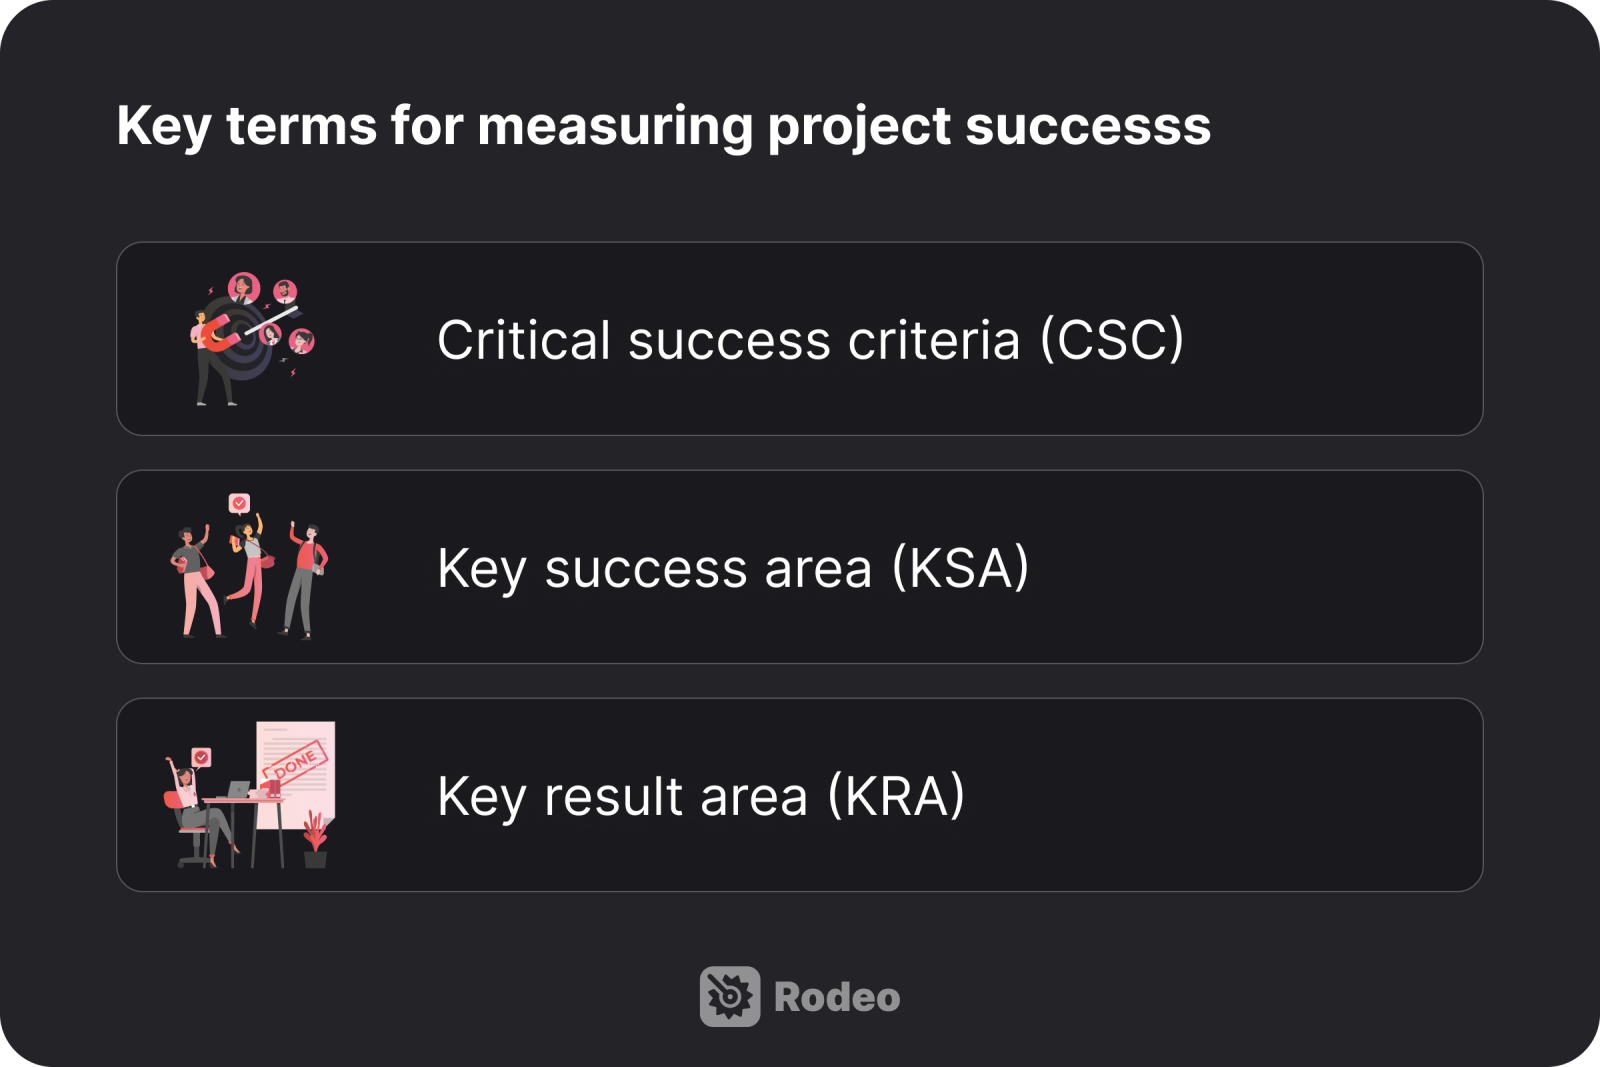 Key terms for measuring project success